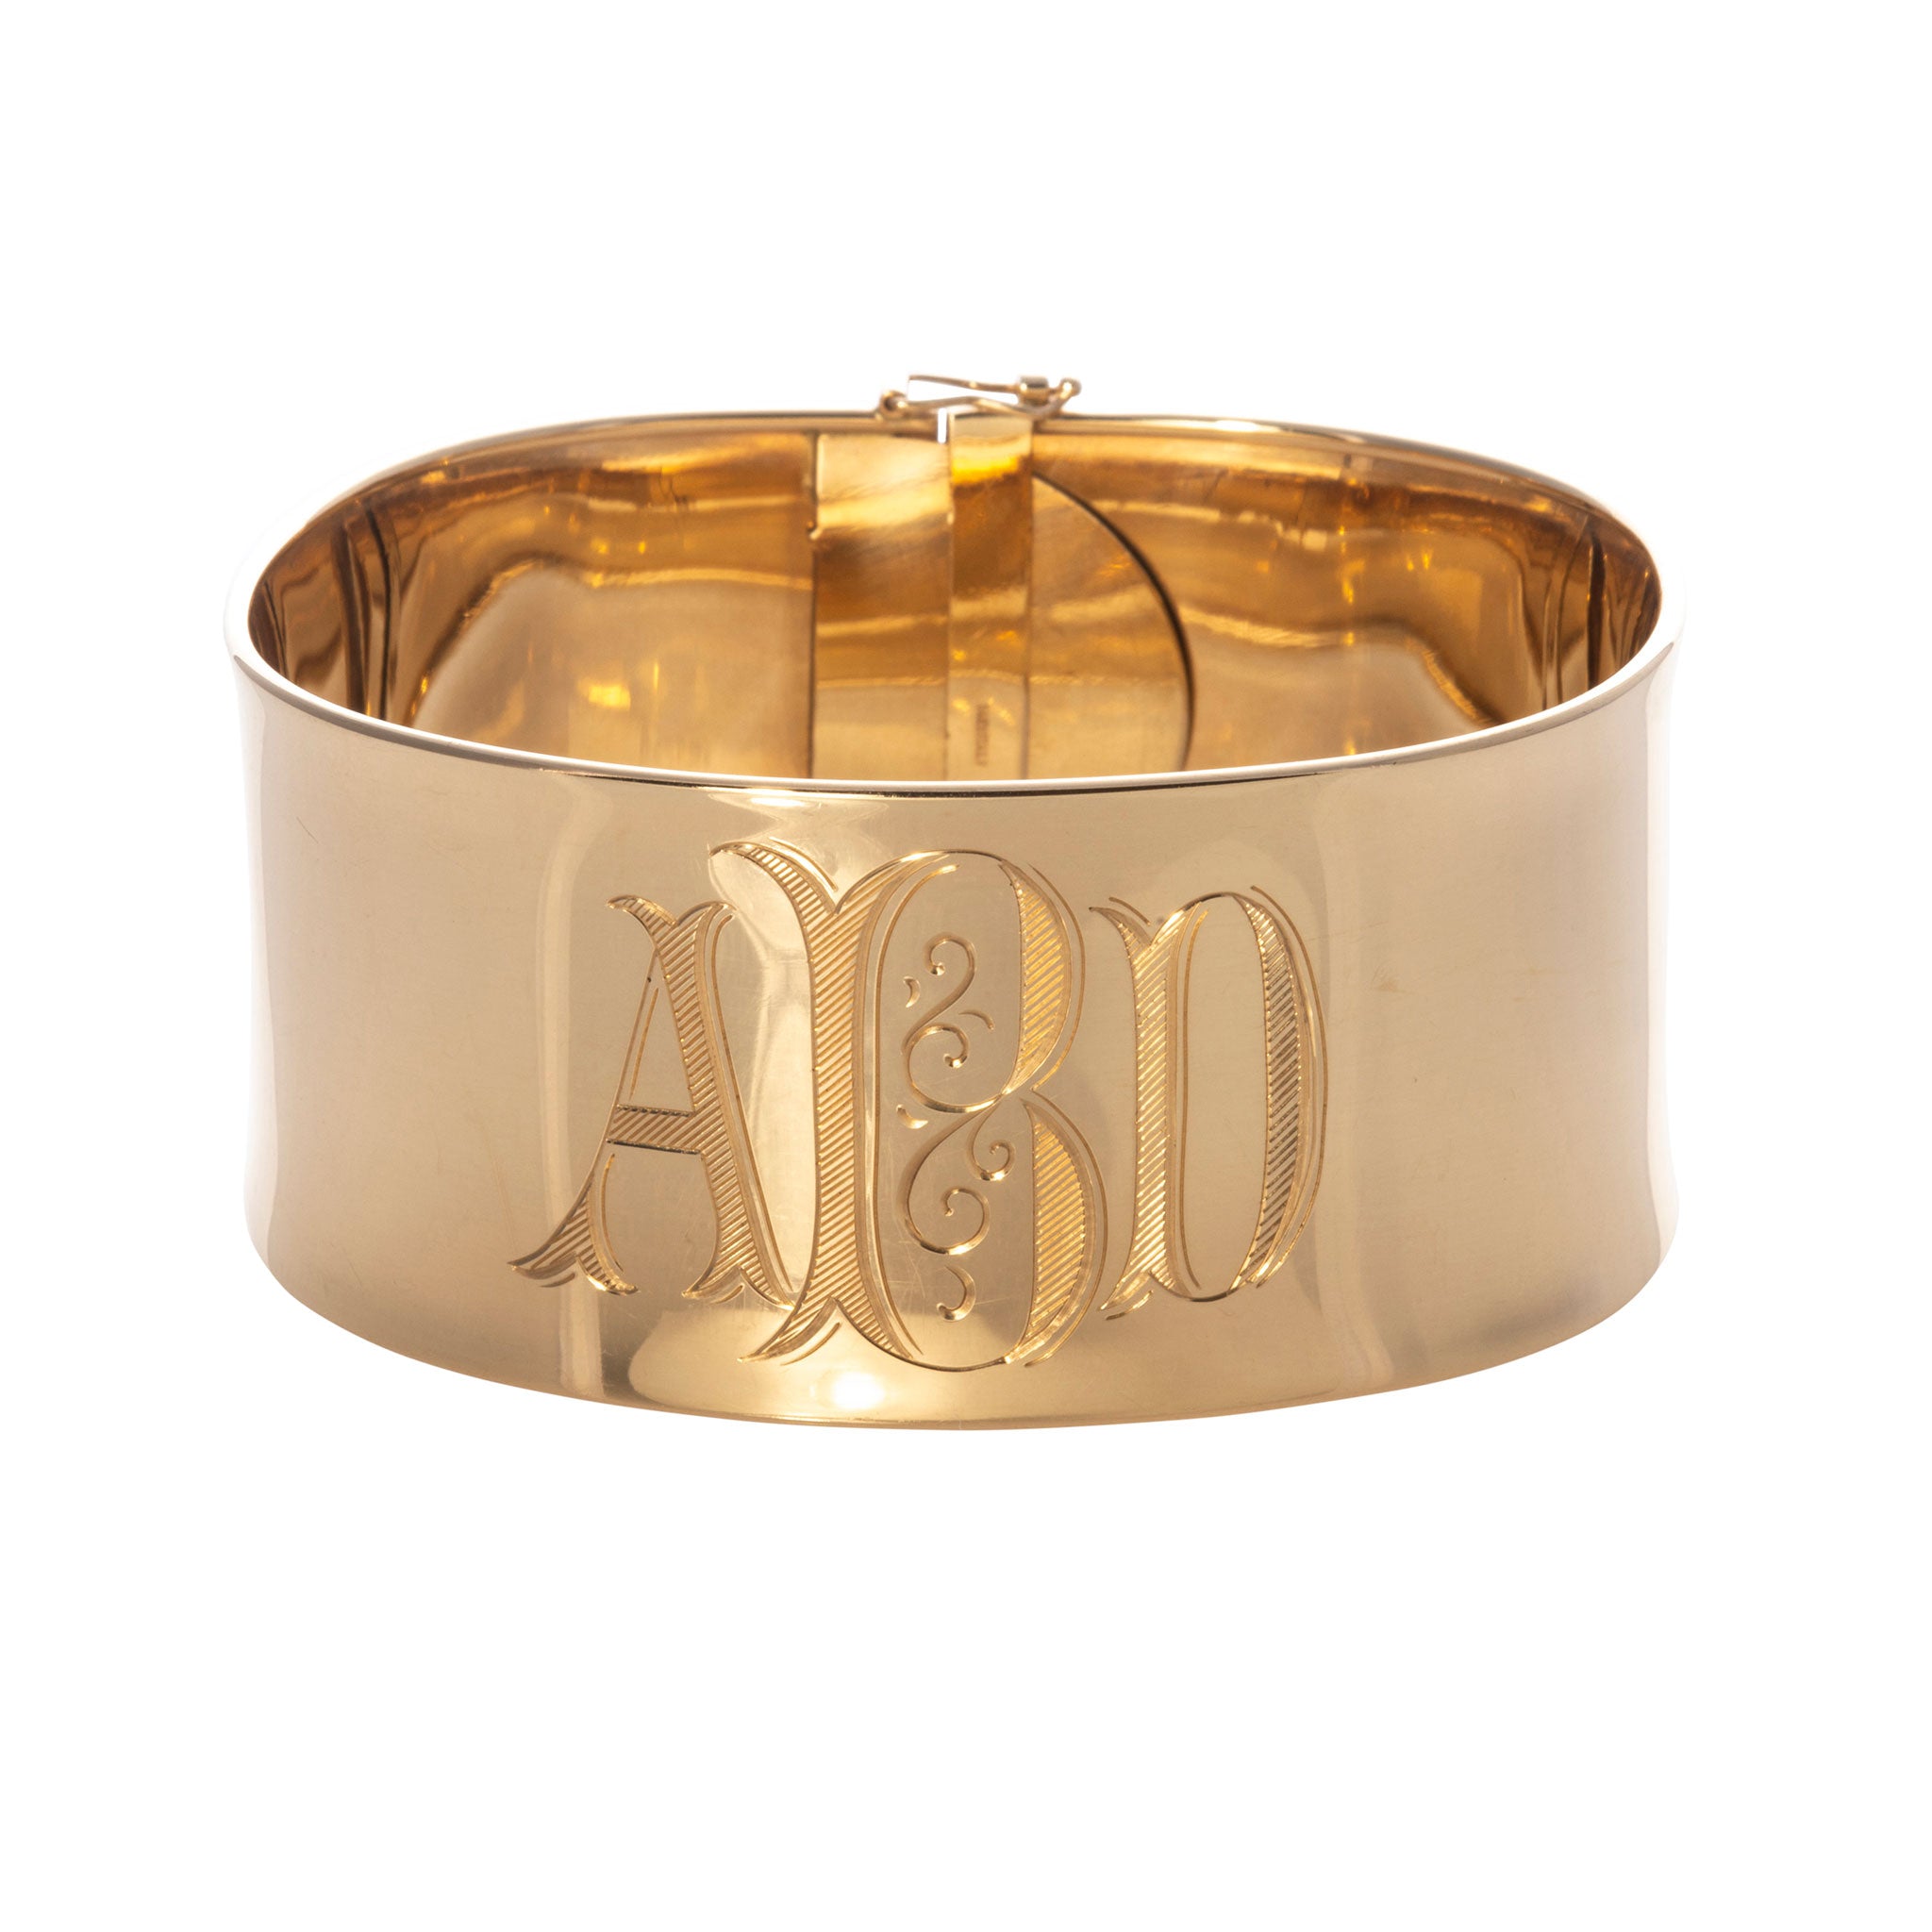 14K Gold Extra Wide Cuff Bangle hand engraved monogram style 218